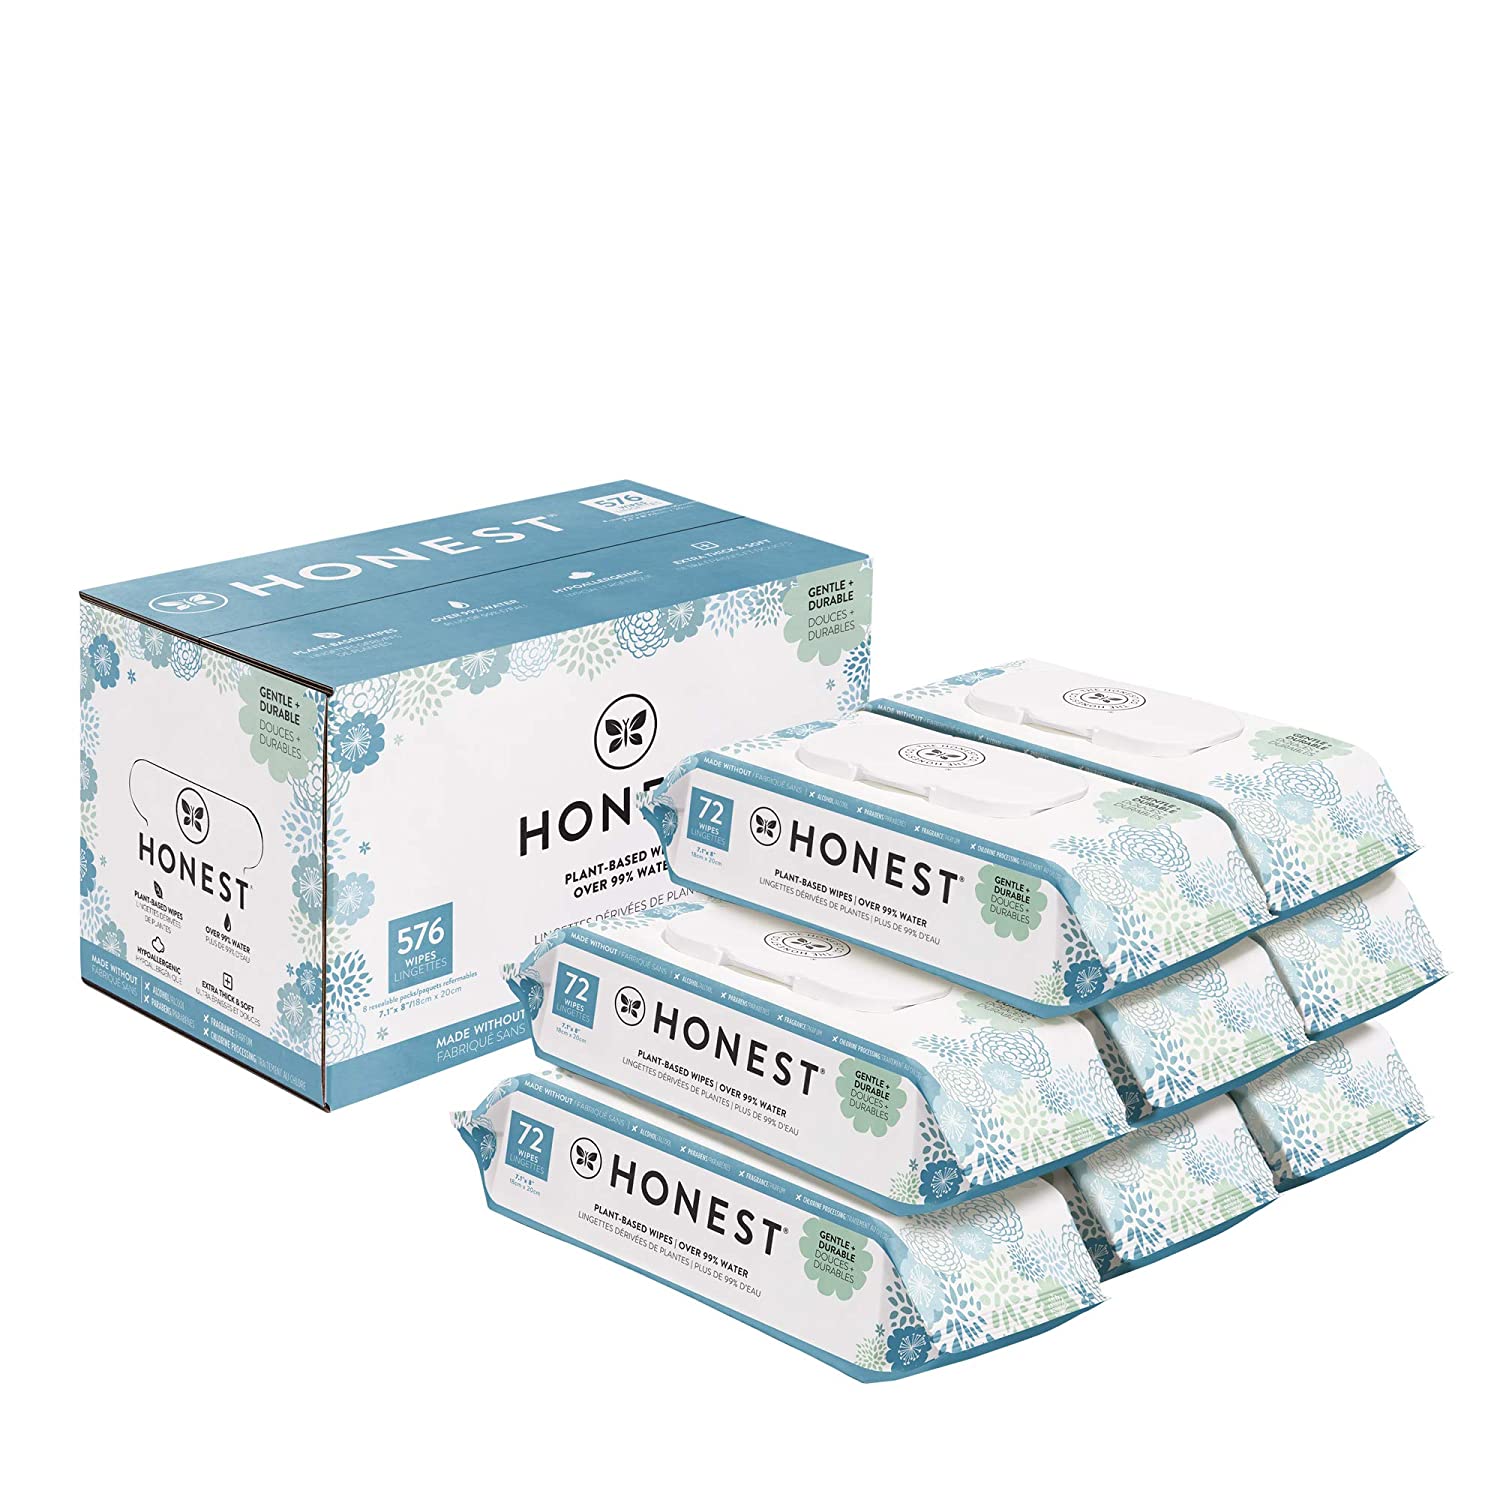 The Honest Company Sensitive Baby Wipes, 576-Count